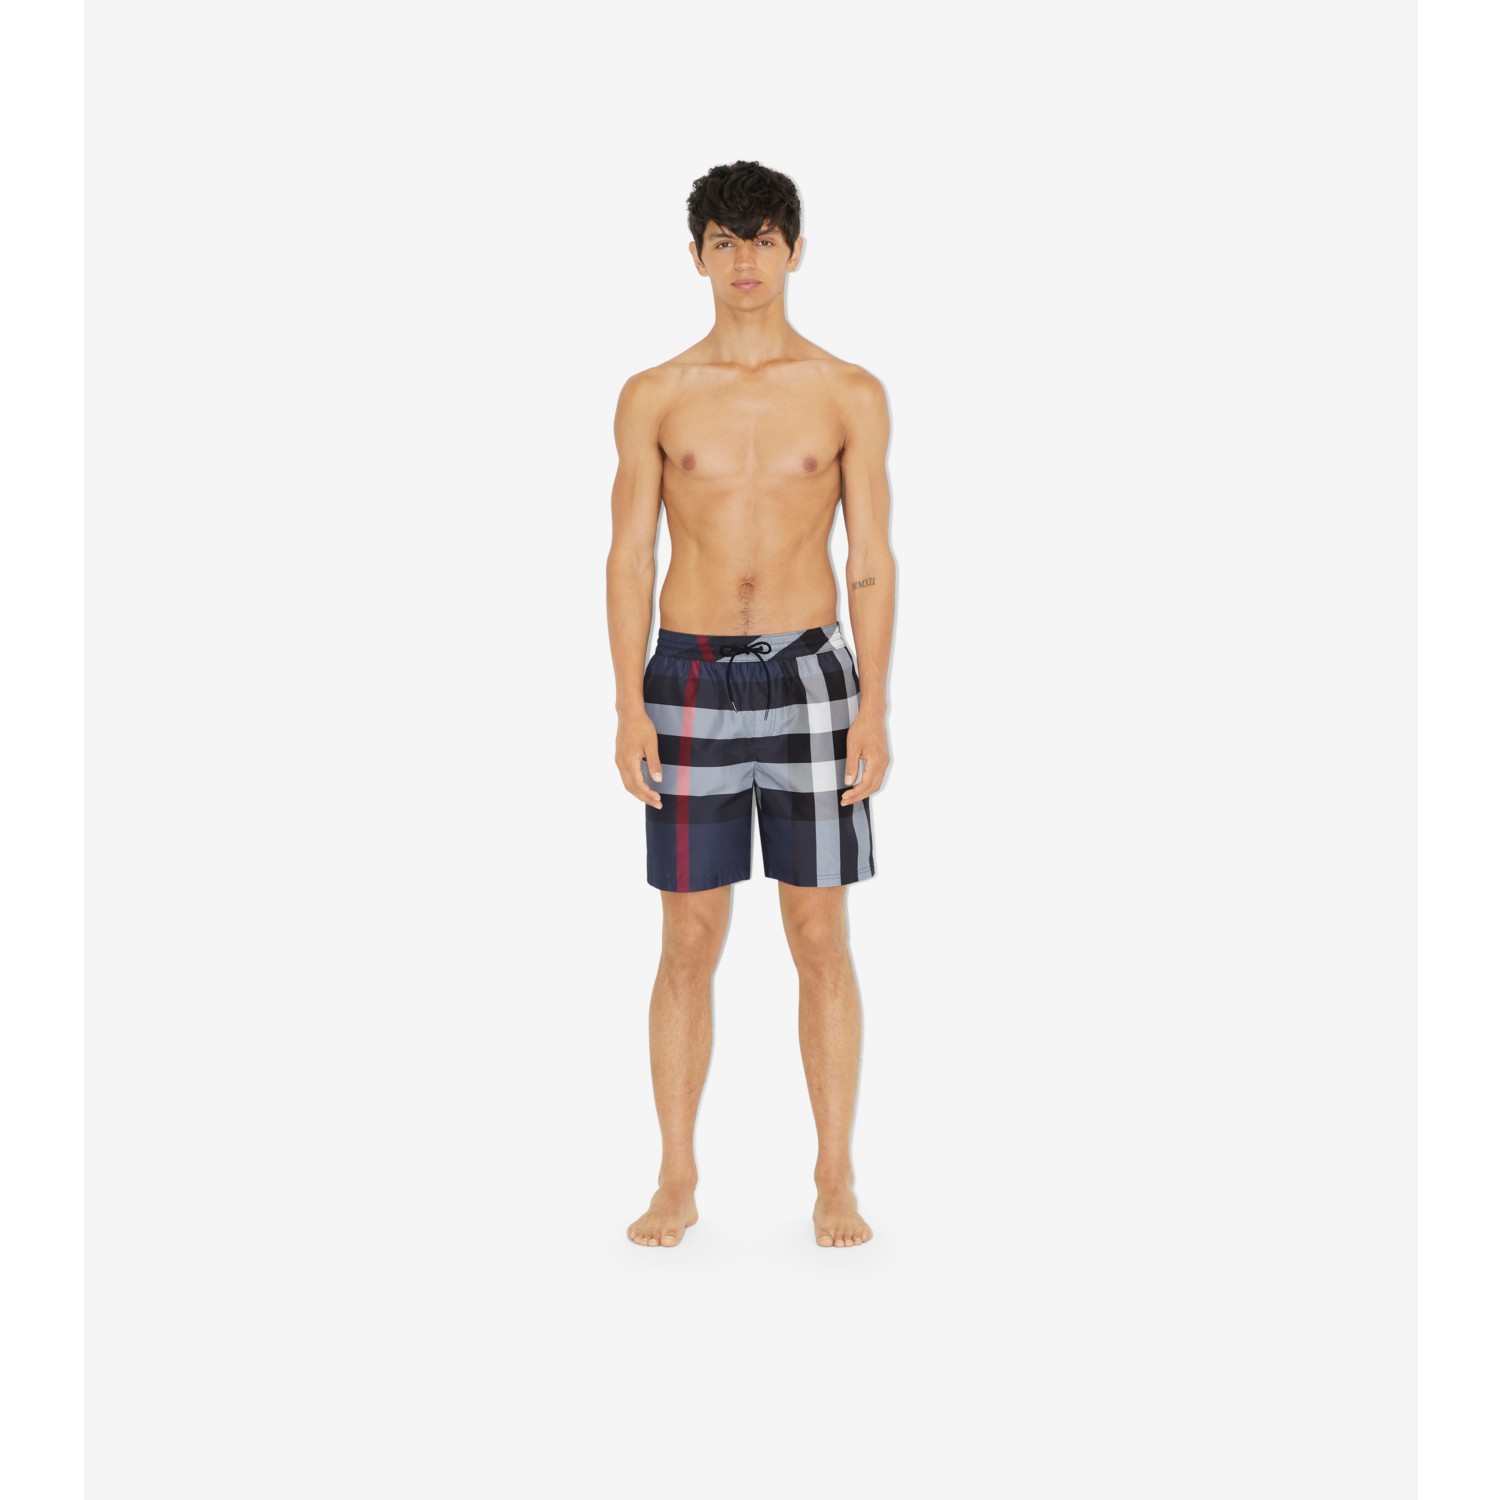 Schwimmshorts in Check